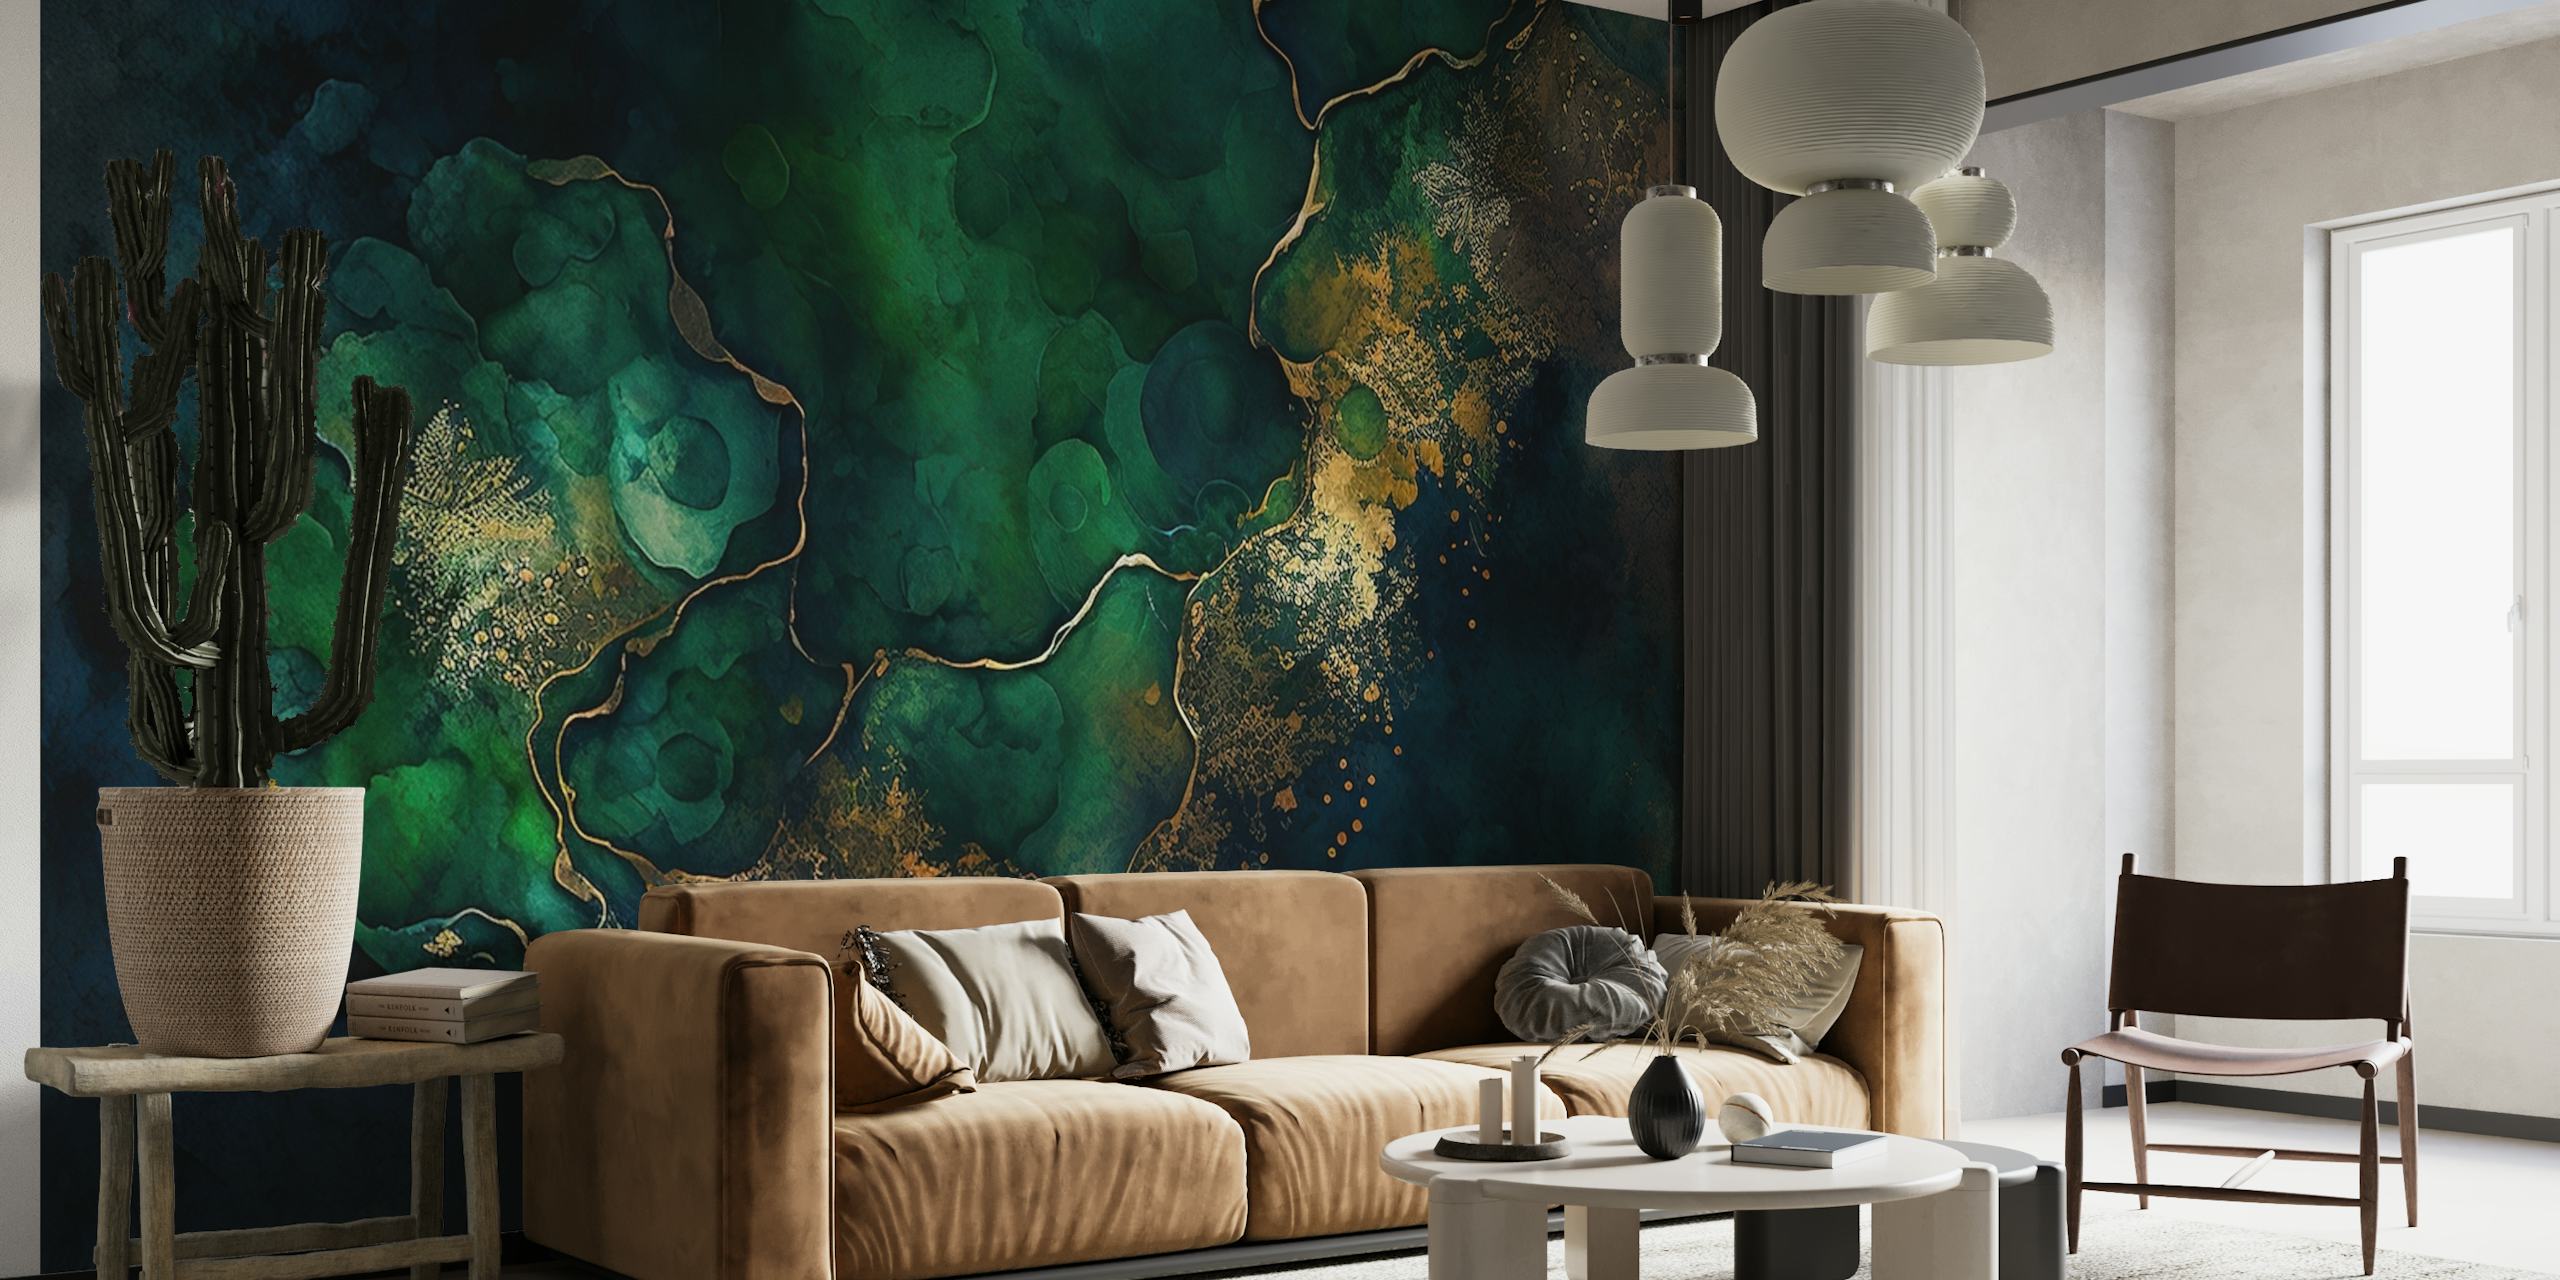 Dark Moody Mystic Marble wall mural featuring swirling blues and greens with accents of earth tones